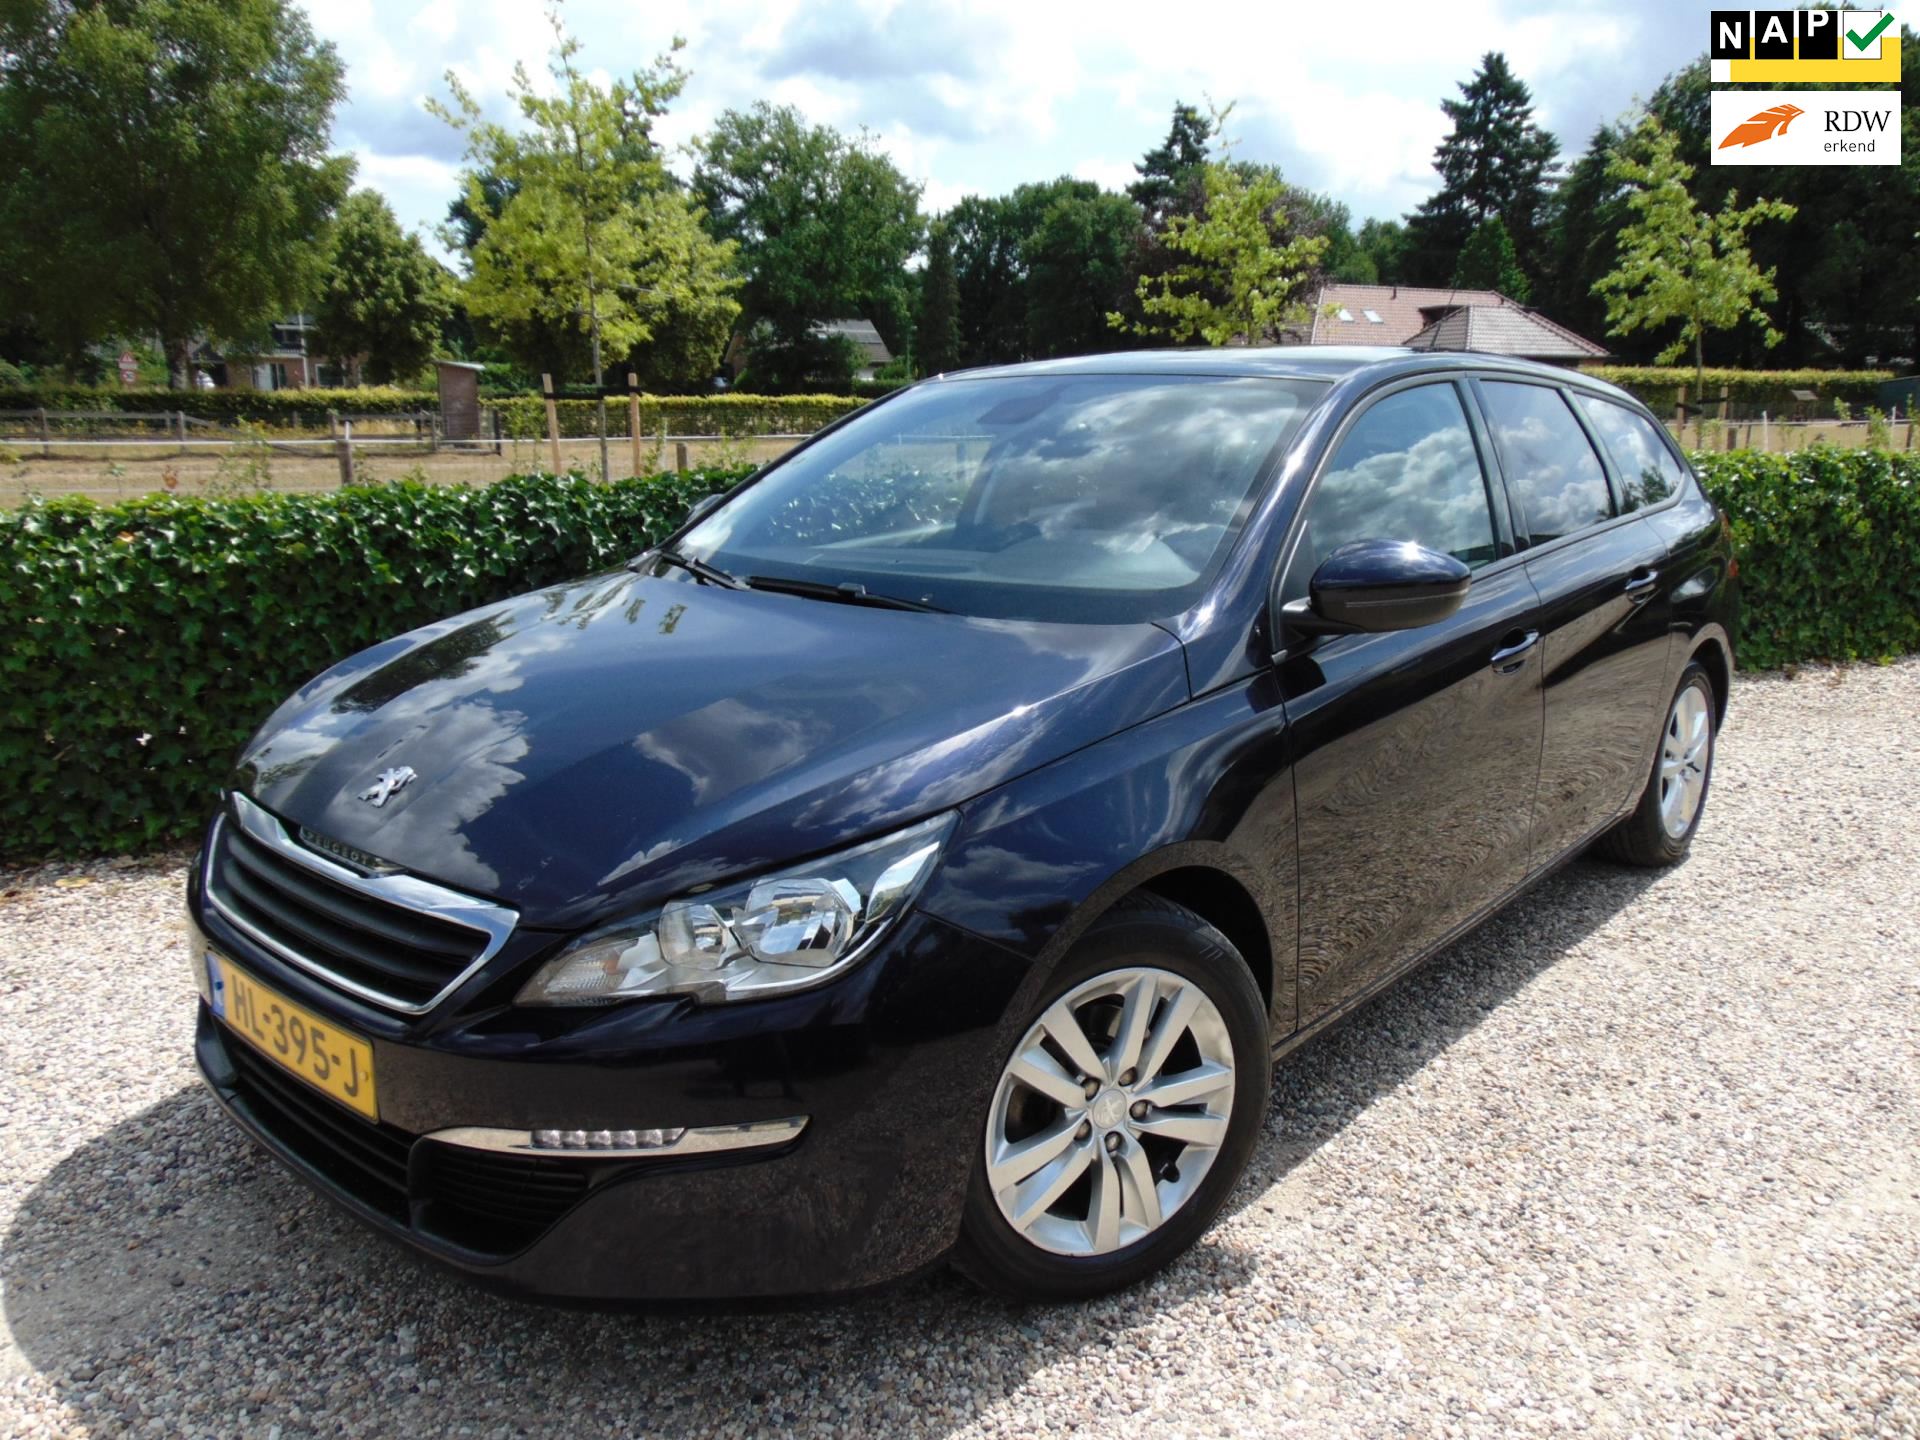 Peugeot 308 SW occasion - Midden Veluwe Auto's